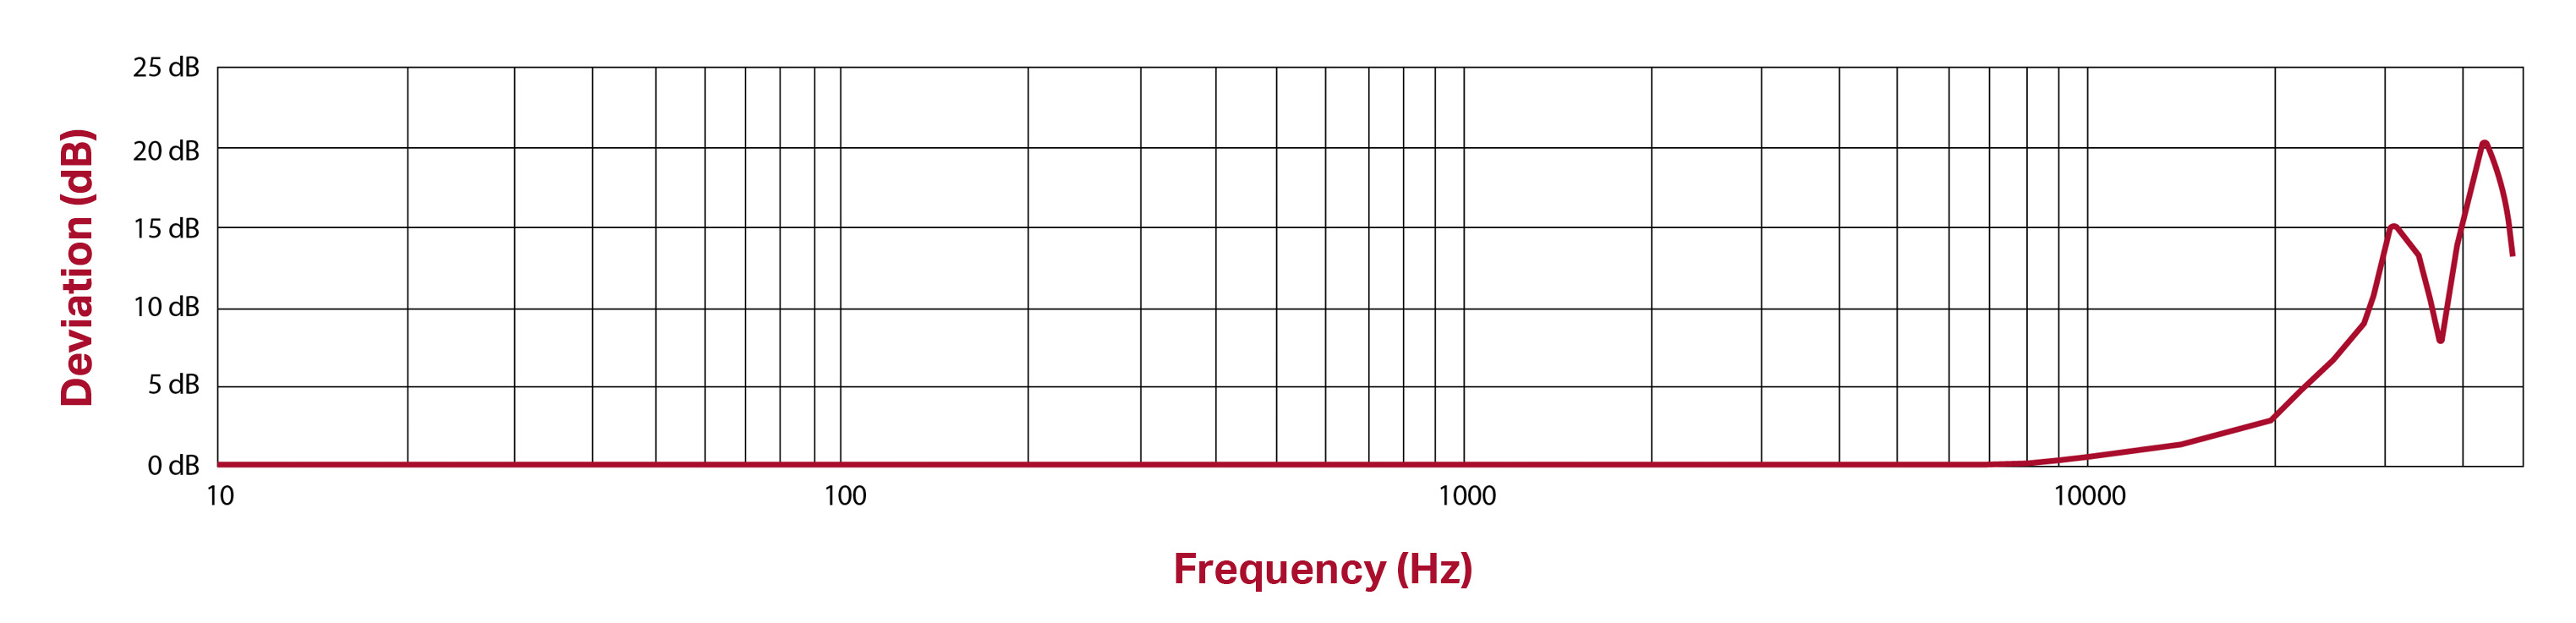 line graph showing the frequency response of UEB330 by charting the Deviation (dB) on the Y axis and Frequency (Hz) on the X axis.